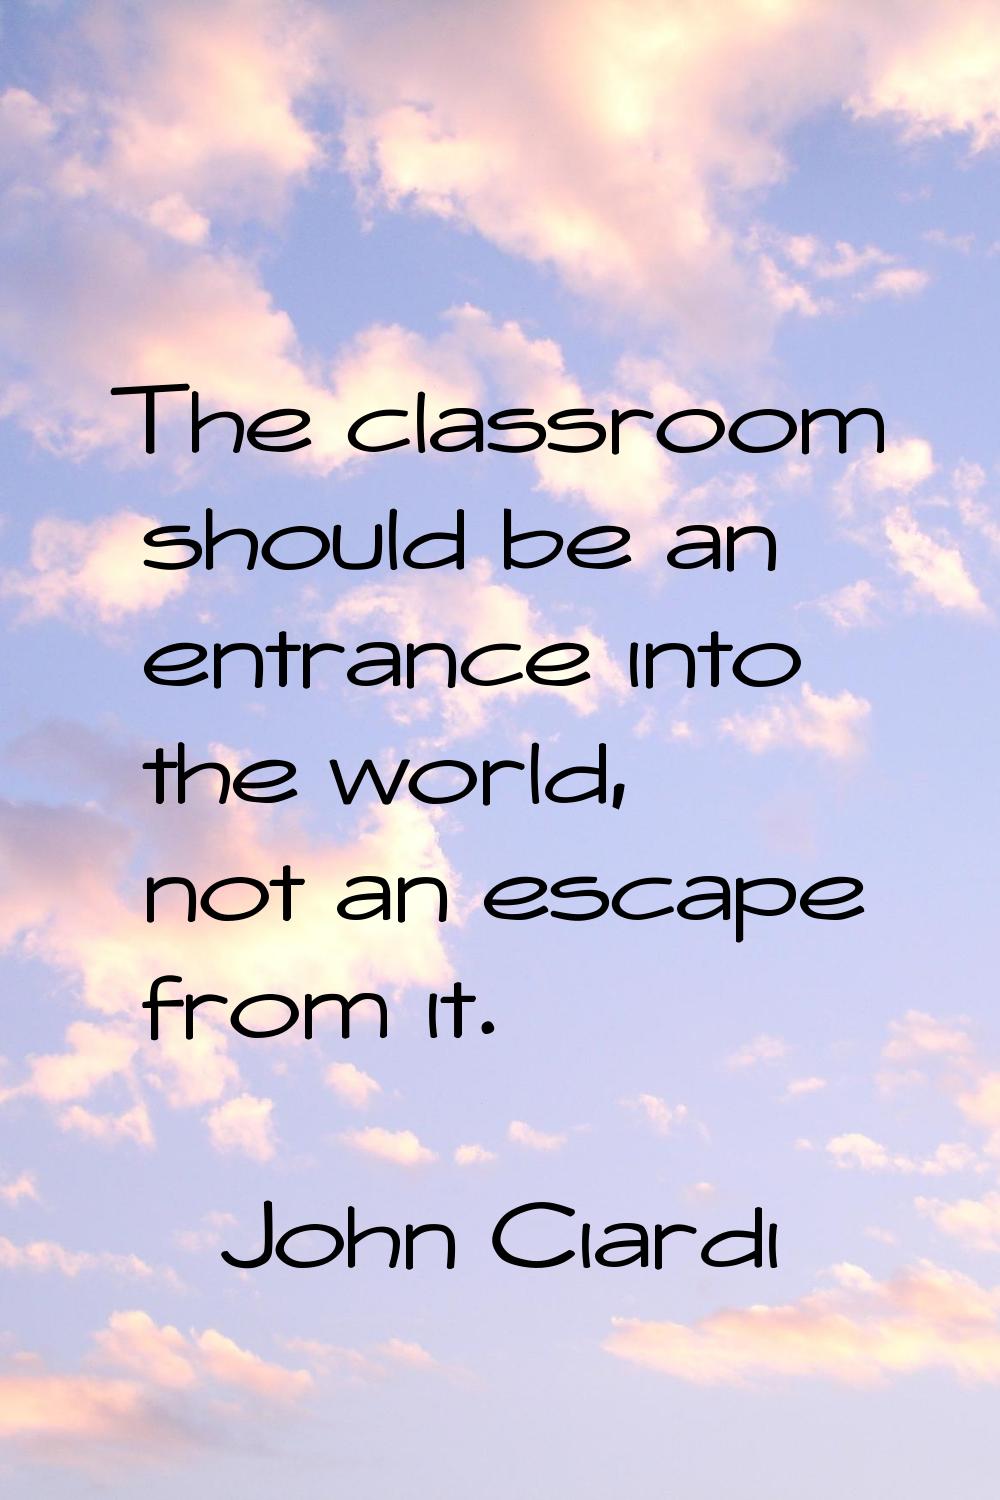 The classroom should be an entrance into the world, not an escape from it.